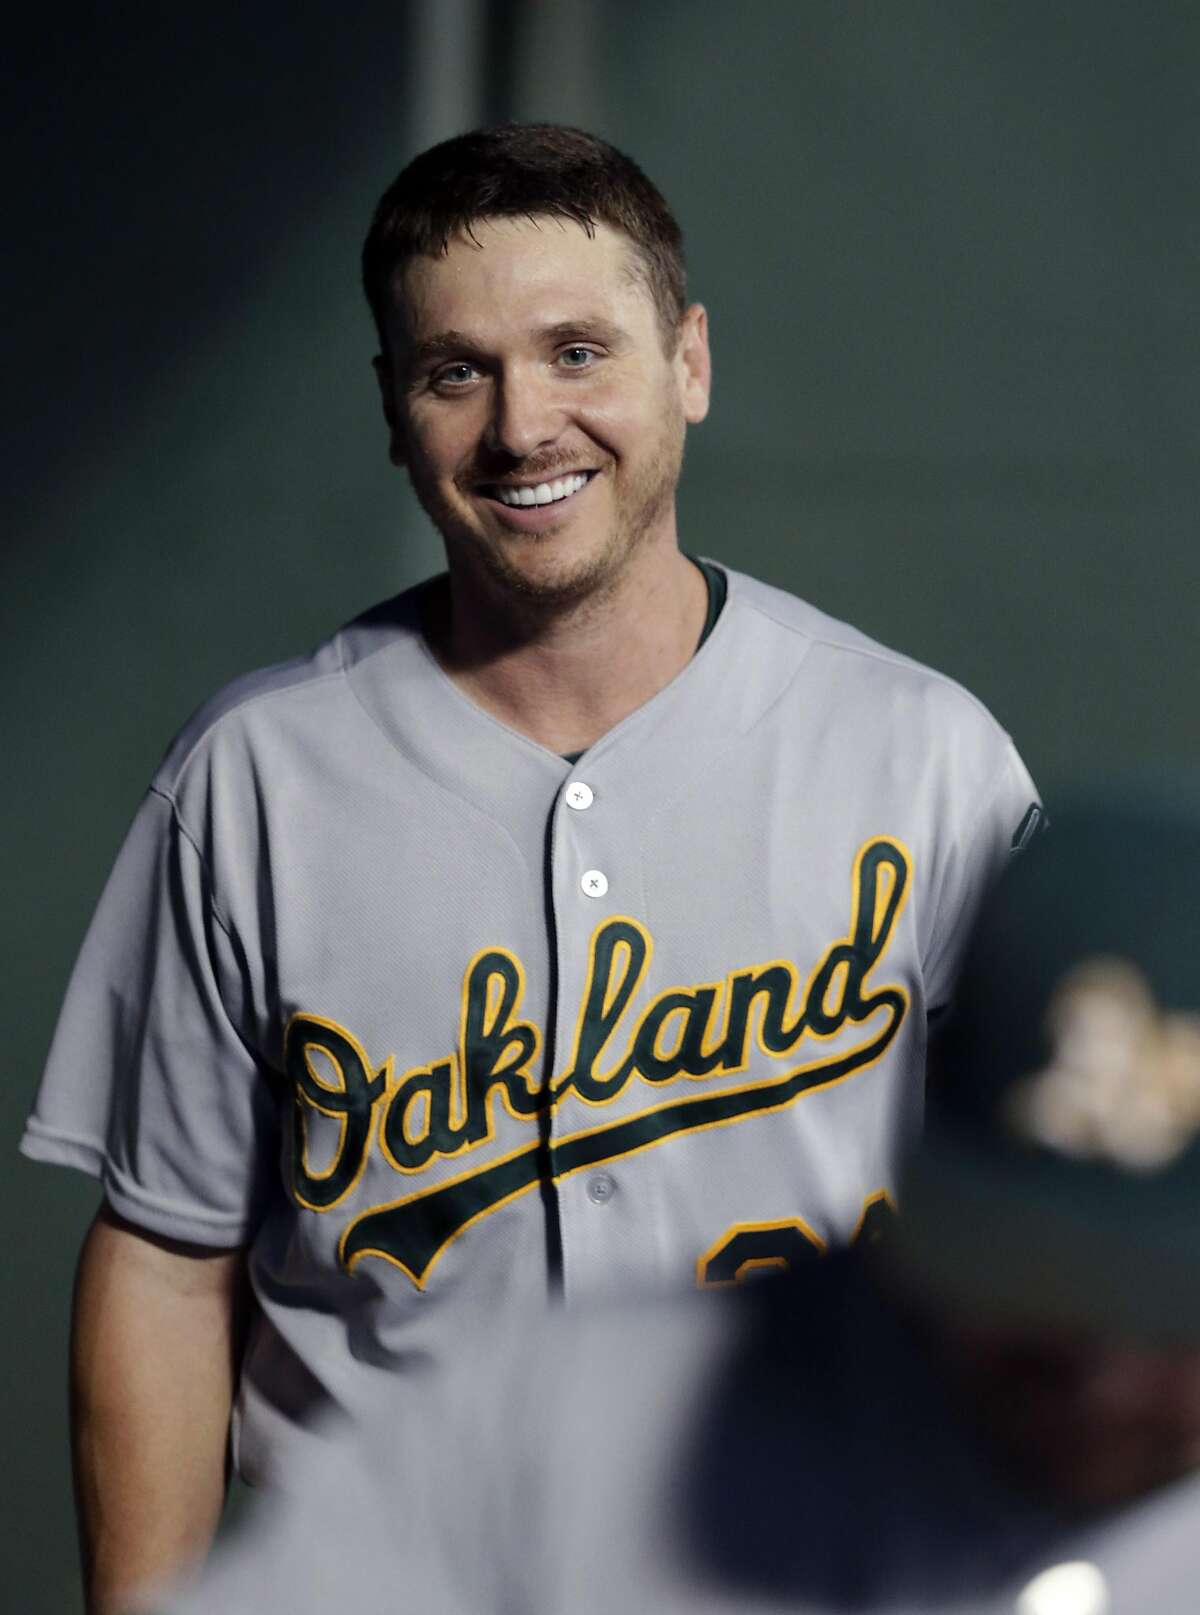 Oakland Athletics starting pitcher Scott Kazmir smiles as he walks in the dugout after coming out of the baseball game against the Texas Rangers in Arlington, Texas, Friday, Sept. 26, 2014. Kazmir won for the first time in seven starts and the Athletics moved ever so close to their third consecutive playoff appearance with a 6-2 victory over the Rangers. (AP Photo/LM Otero)